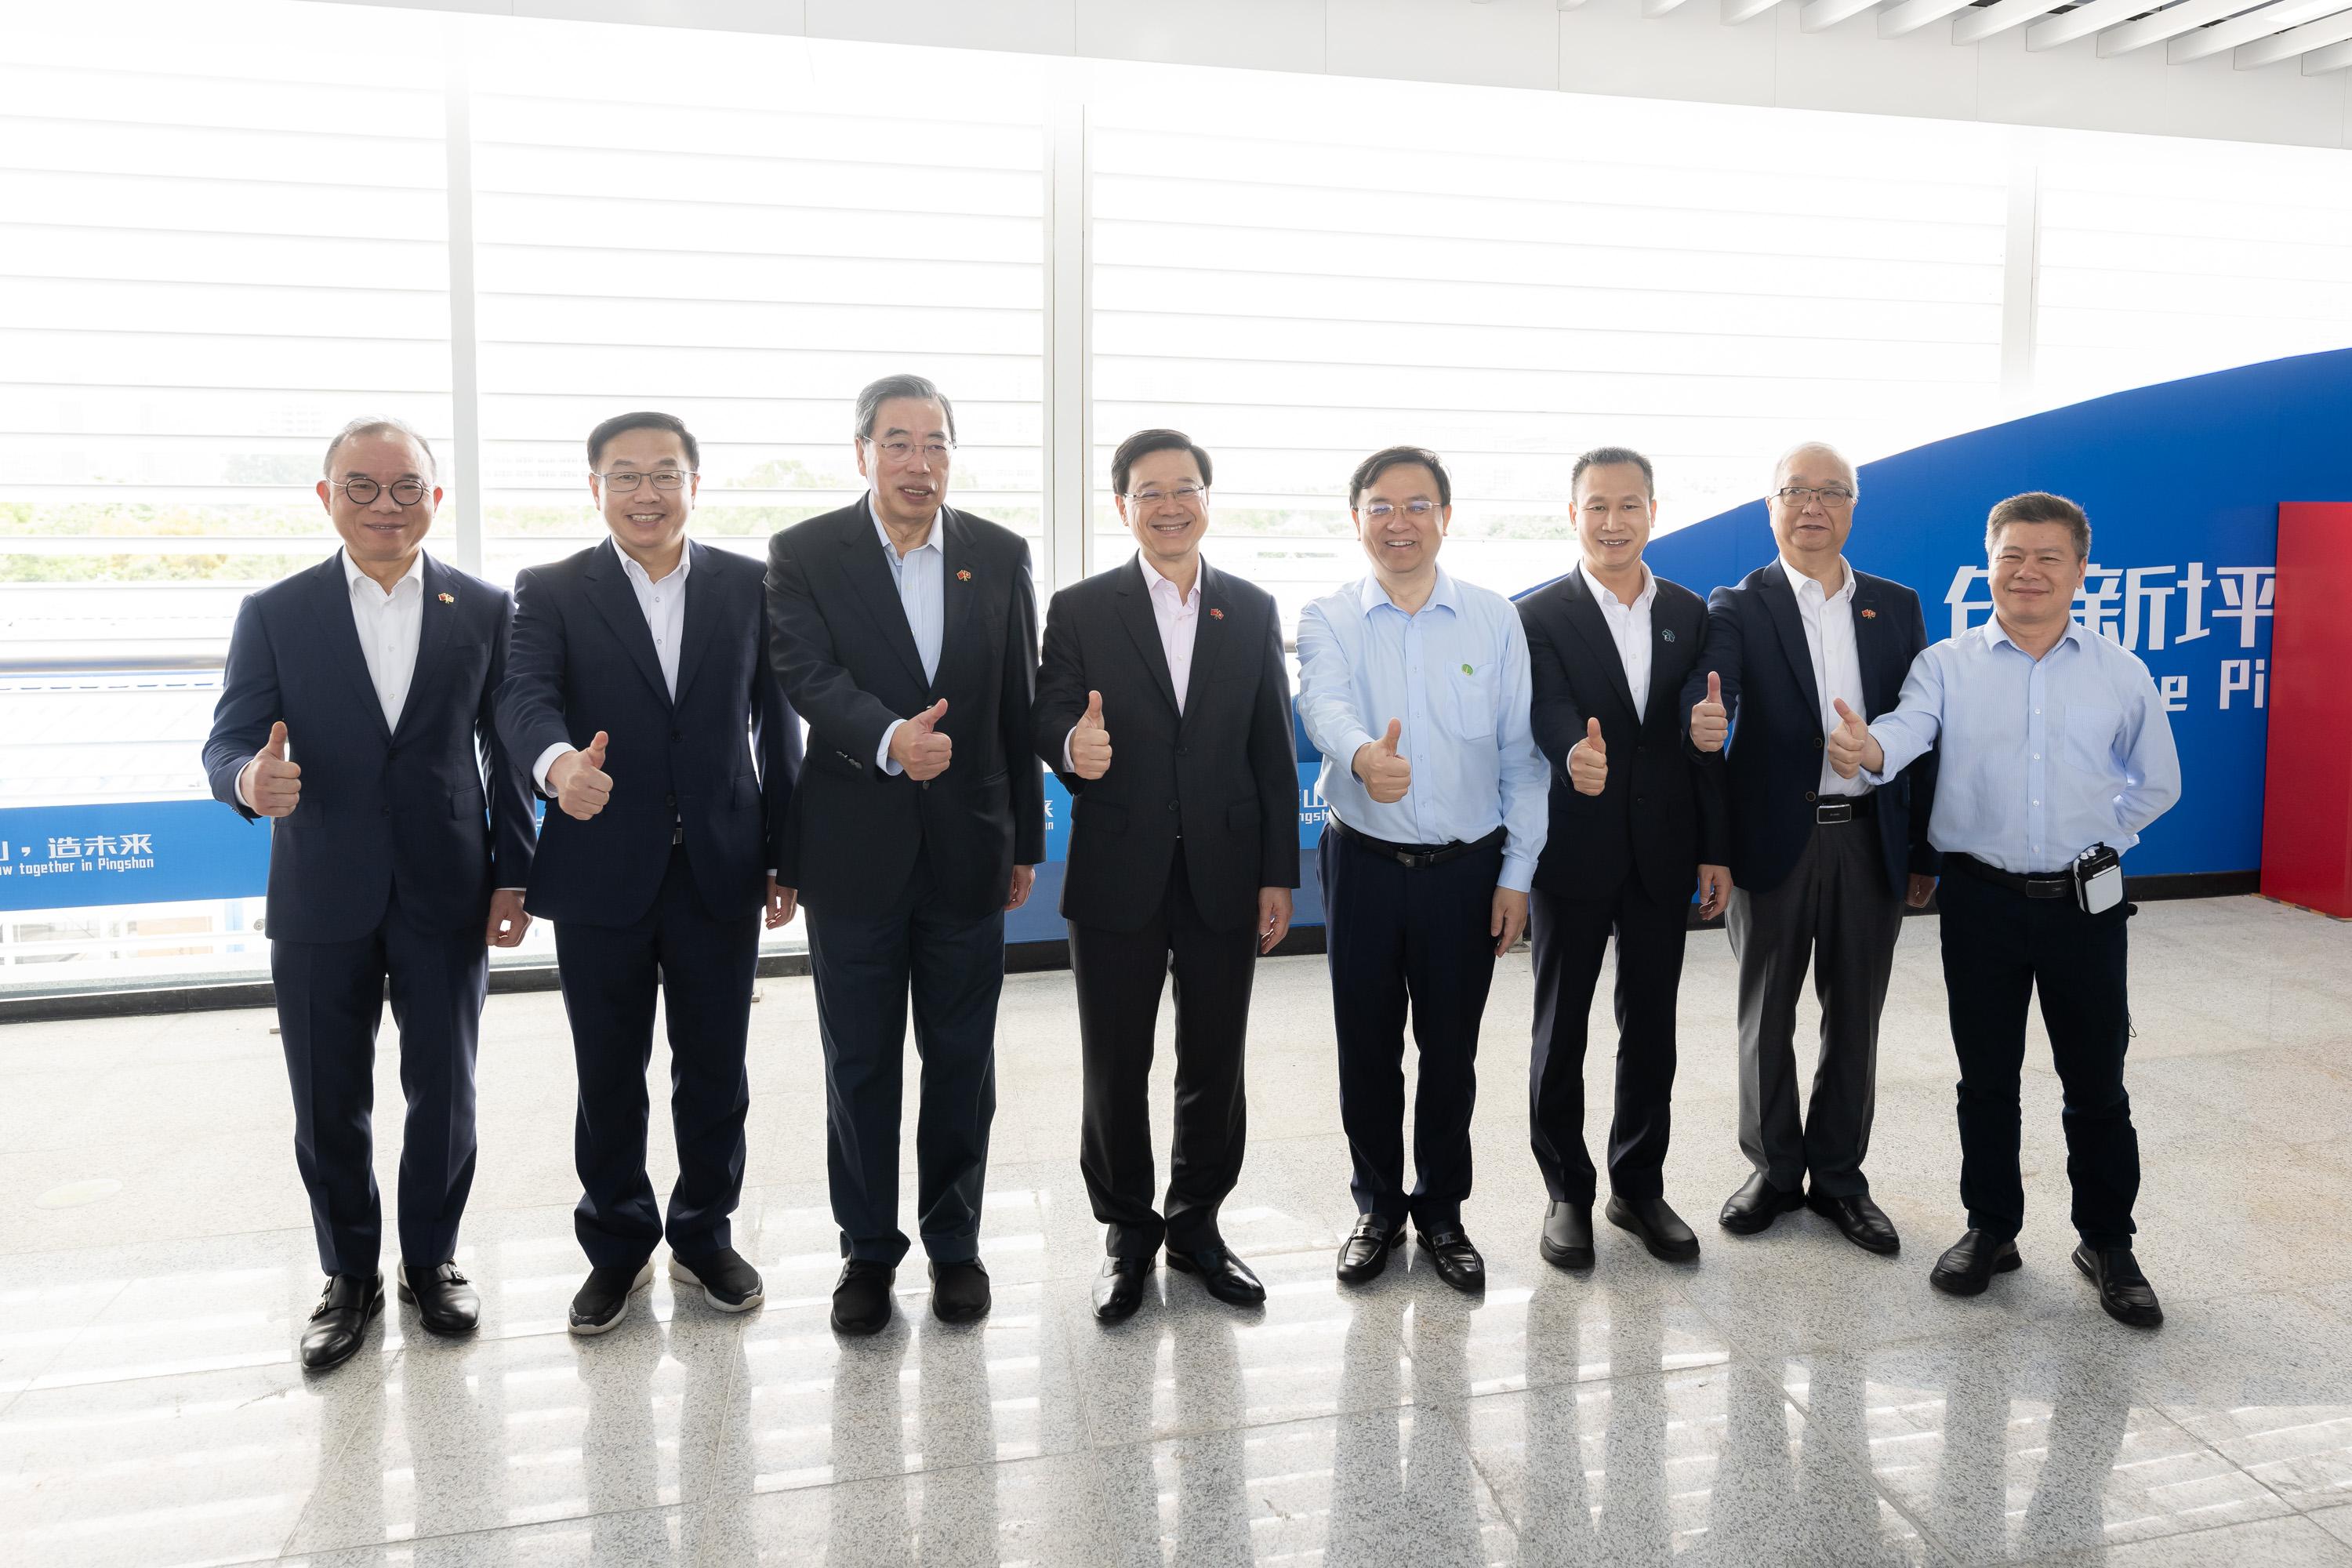 The delegation of the Hong Kong Special Administrative Region Government and the Legislative Council led by the Chief Executive, Mr John Lee, continues its duty visit in the Guangdong-Hong Kong-Macao Greater Bay Area today (April 22). Photo shows Mr Lee (fourth left); the President of LegCo, Mr Andrew Leung (third left); the Founder and President of BYD Company Limited, Mr Wang Chuanfu (fourth right); and other delegation members posing for a group photo at the headquarters of BYD Company Limited.